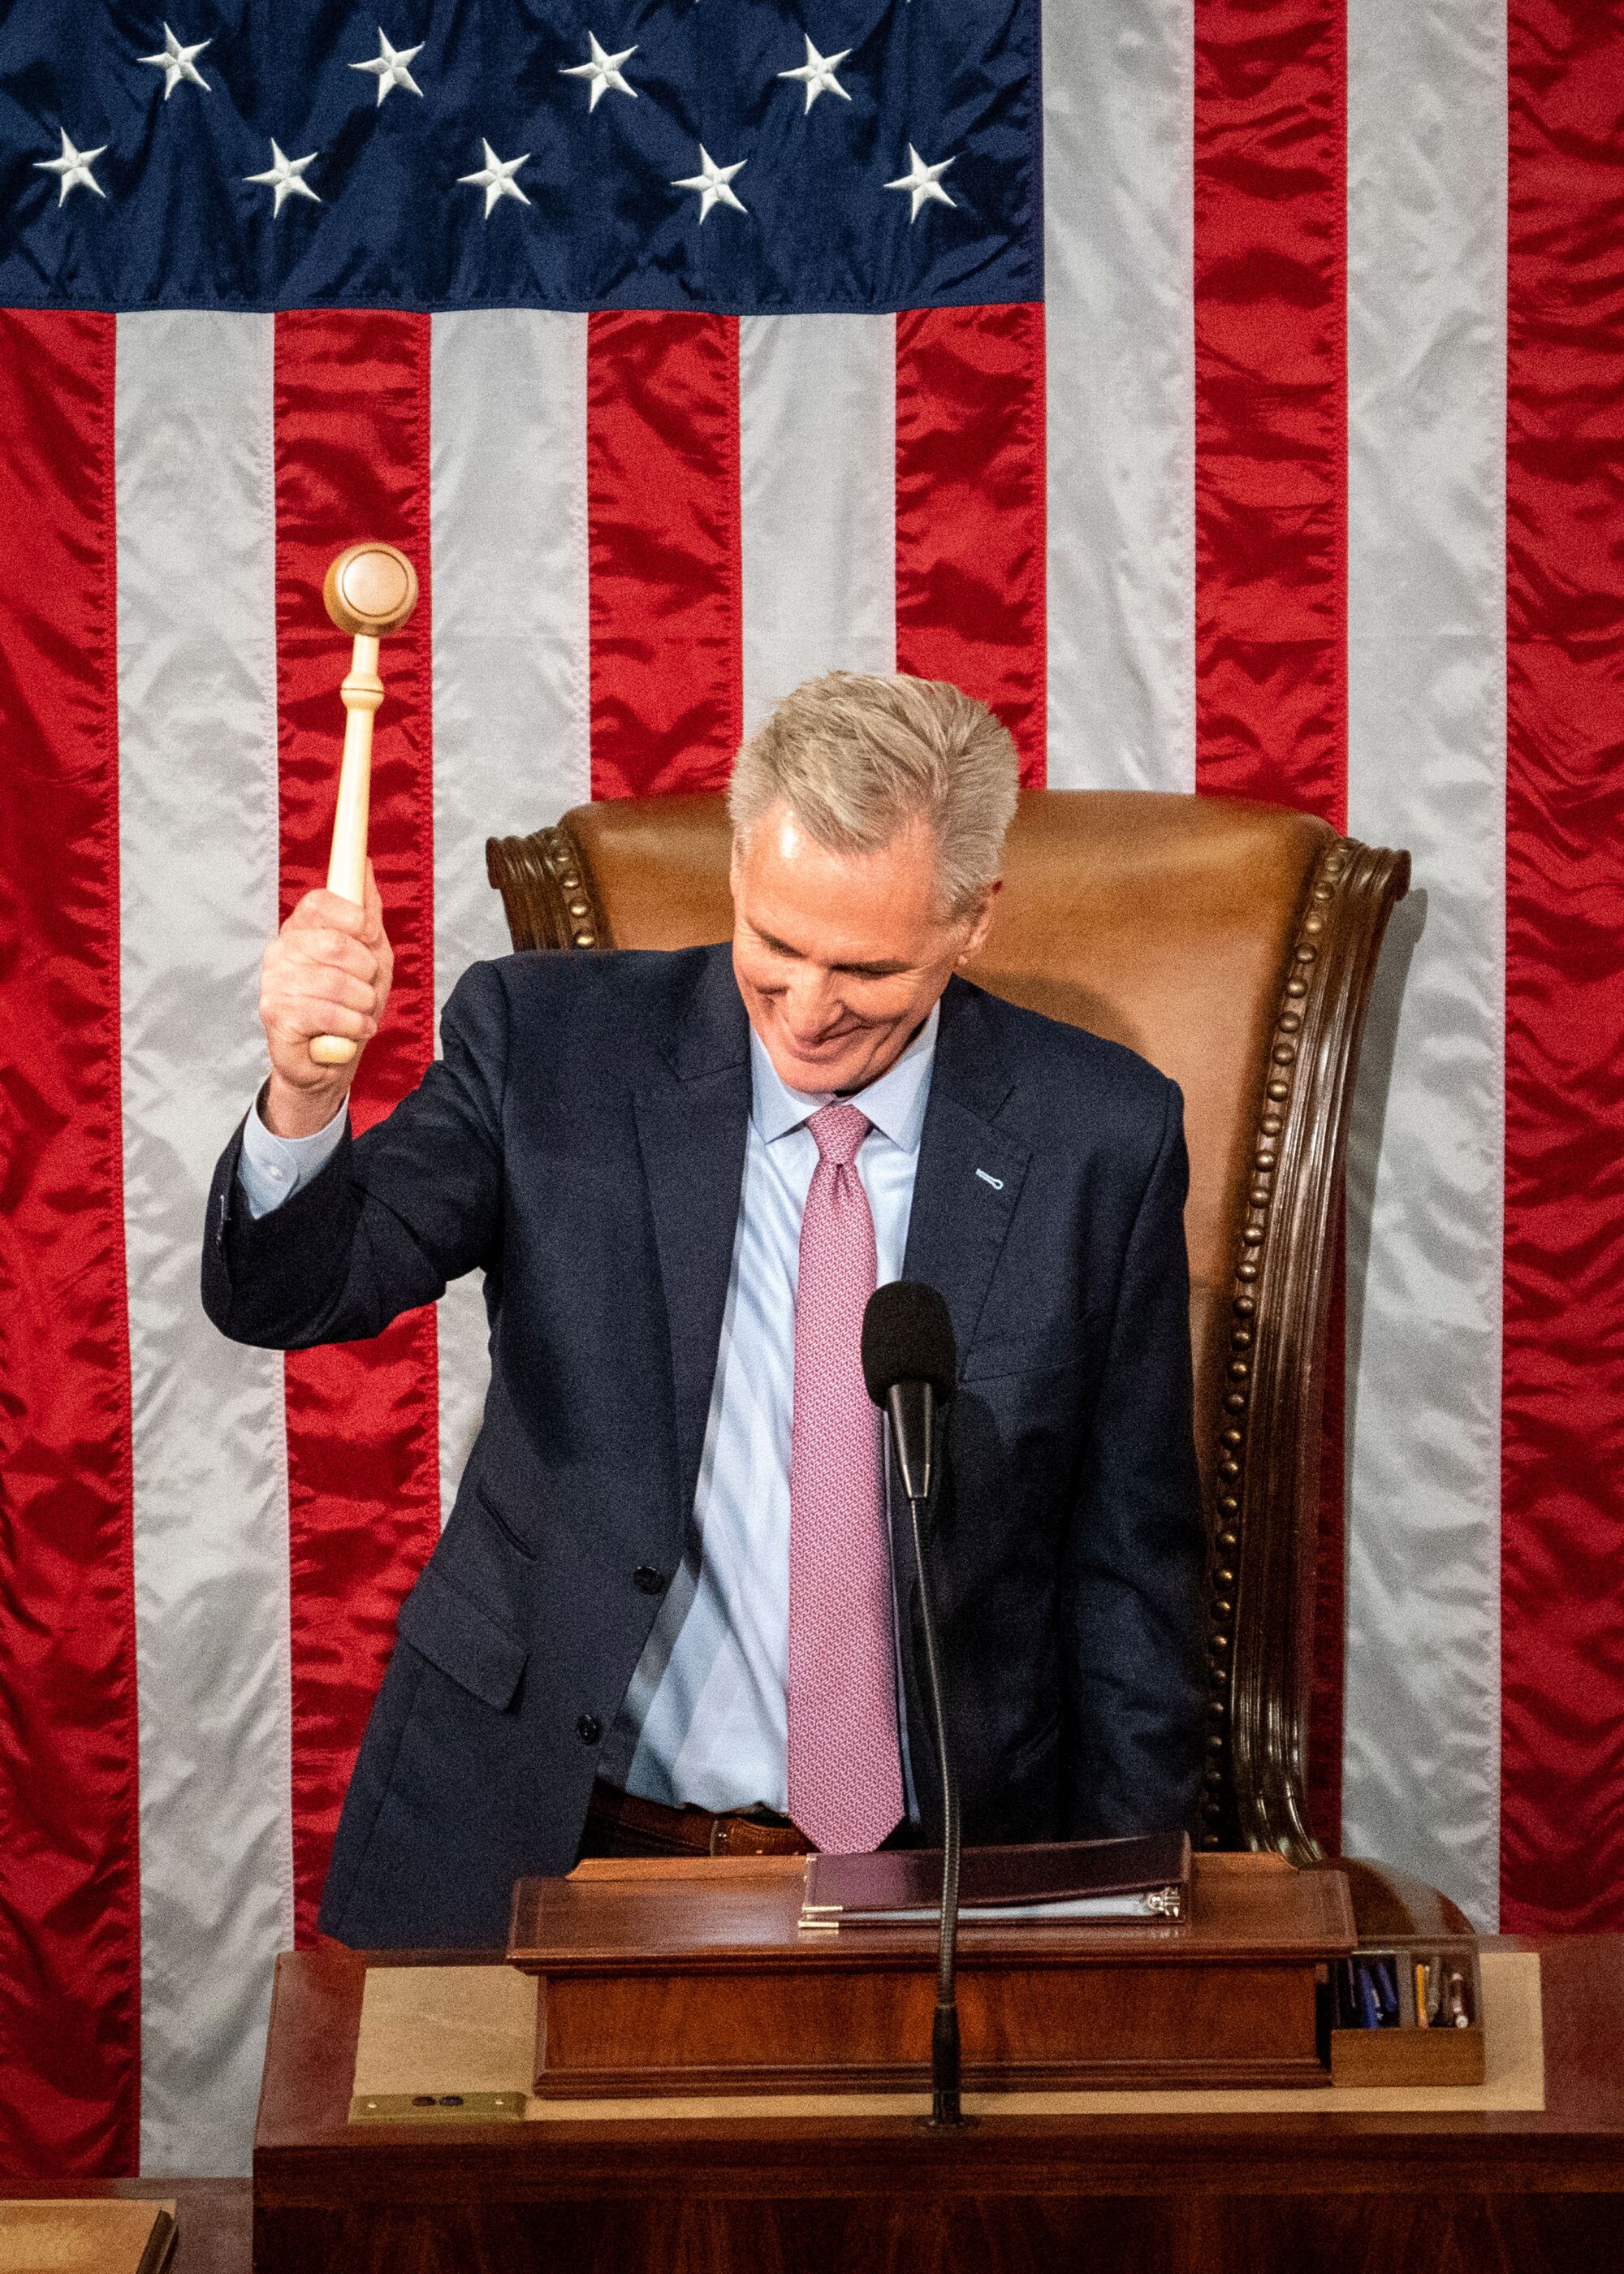 A man is striking down a gavel in front of the American flag.